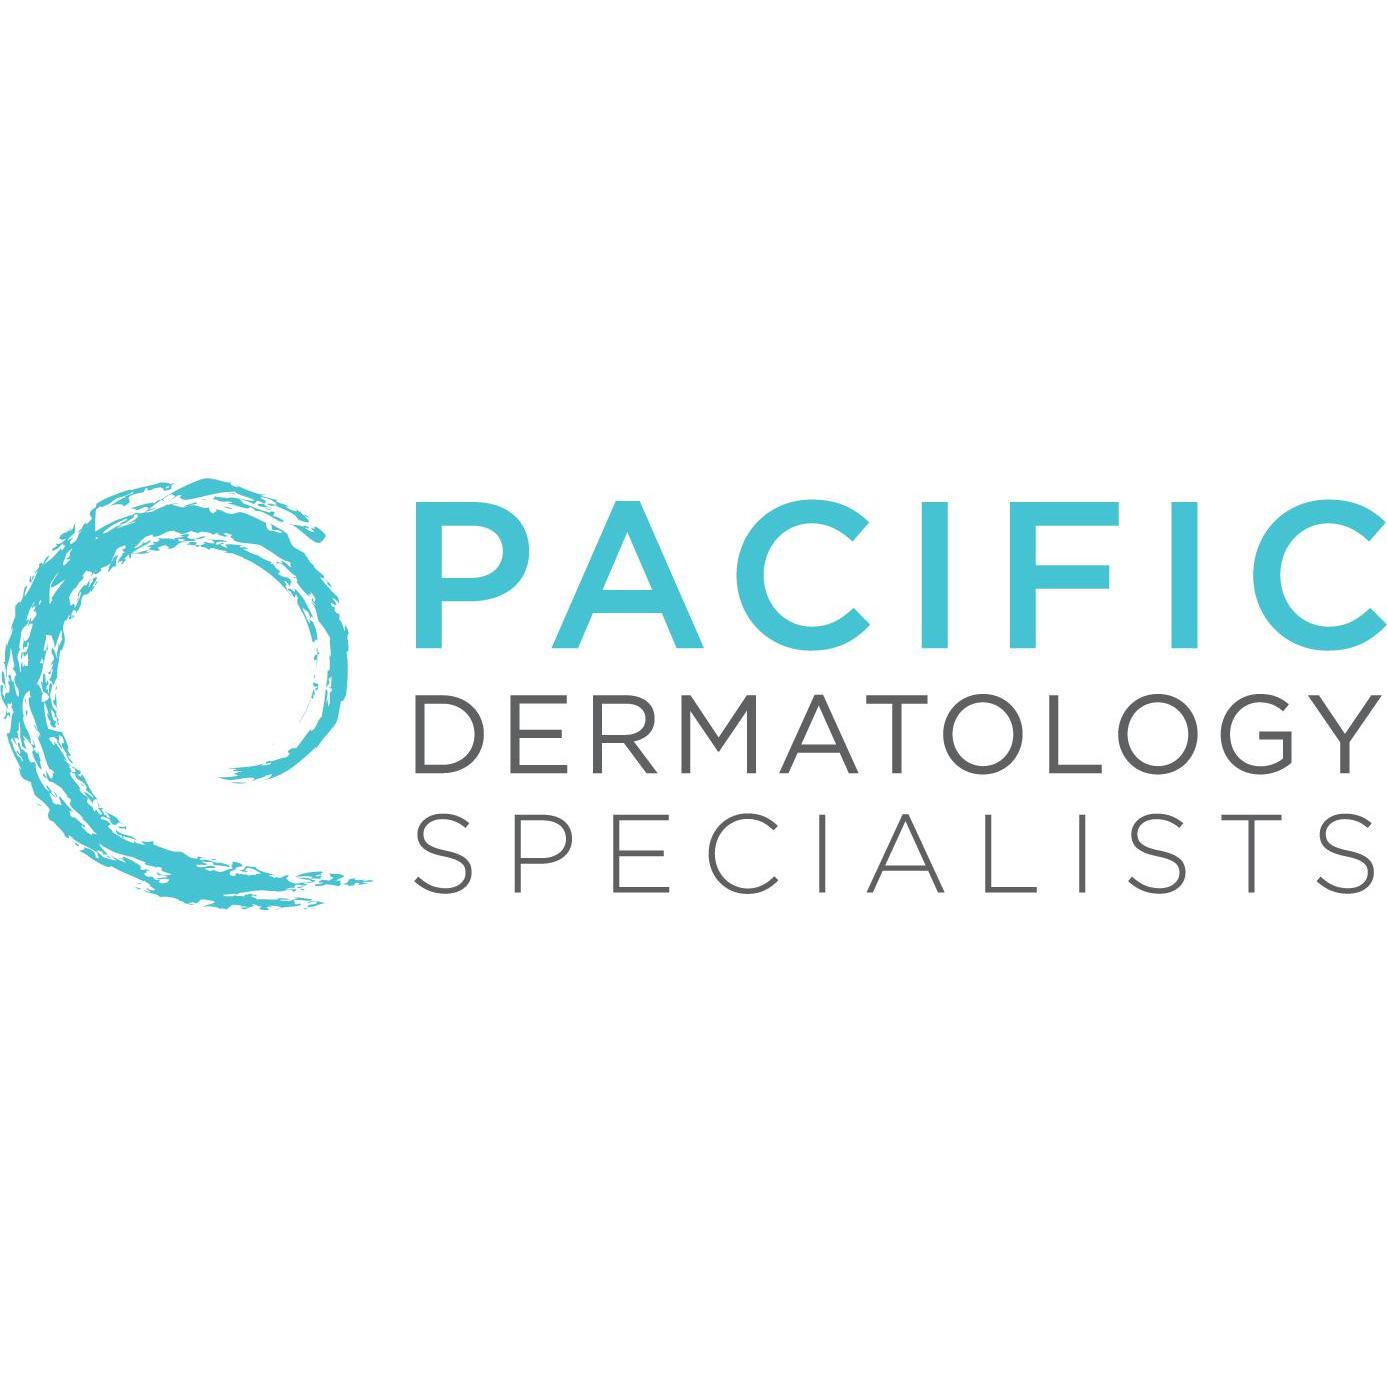 Pacific Dermatology Specialists is a leading dermatology clinic in Long Beach, CA. We offer a wide r Pacific Dermatology Specialists Long Beach (562)433-7700